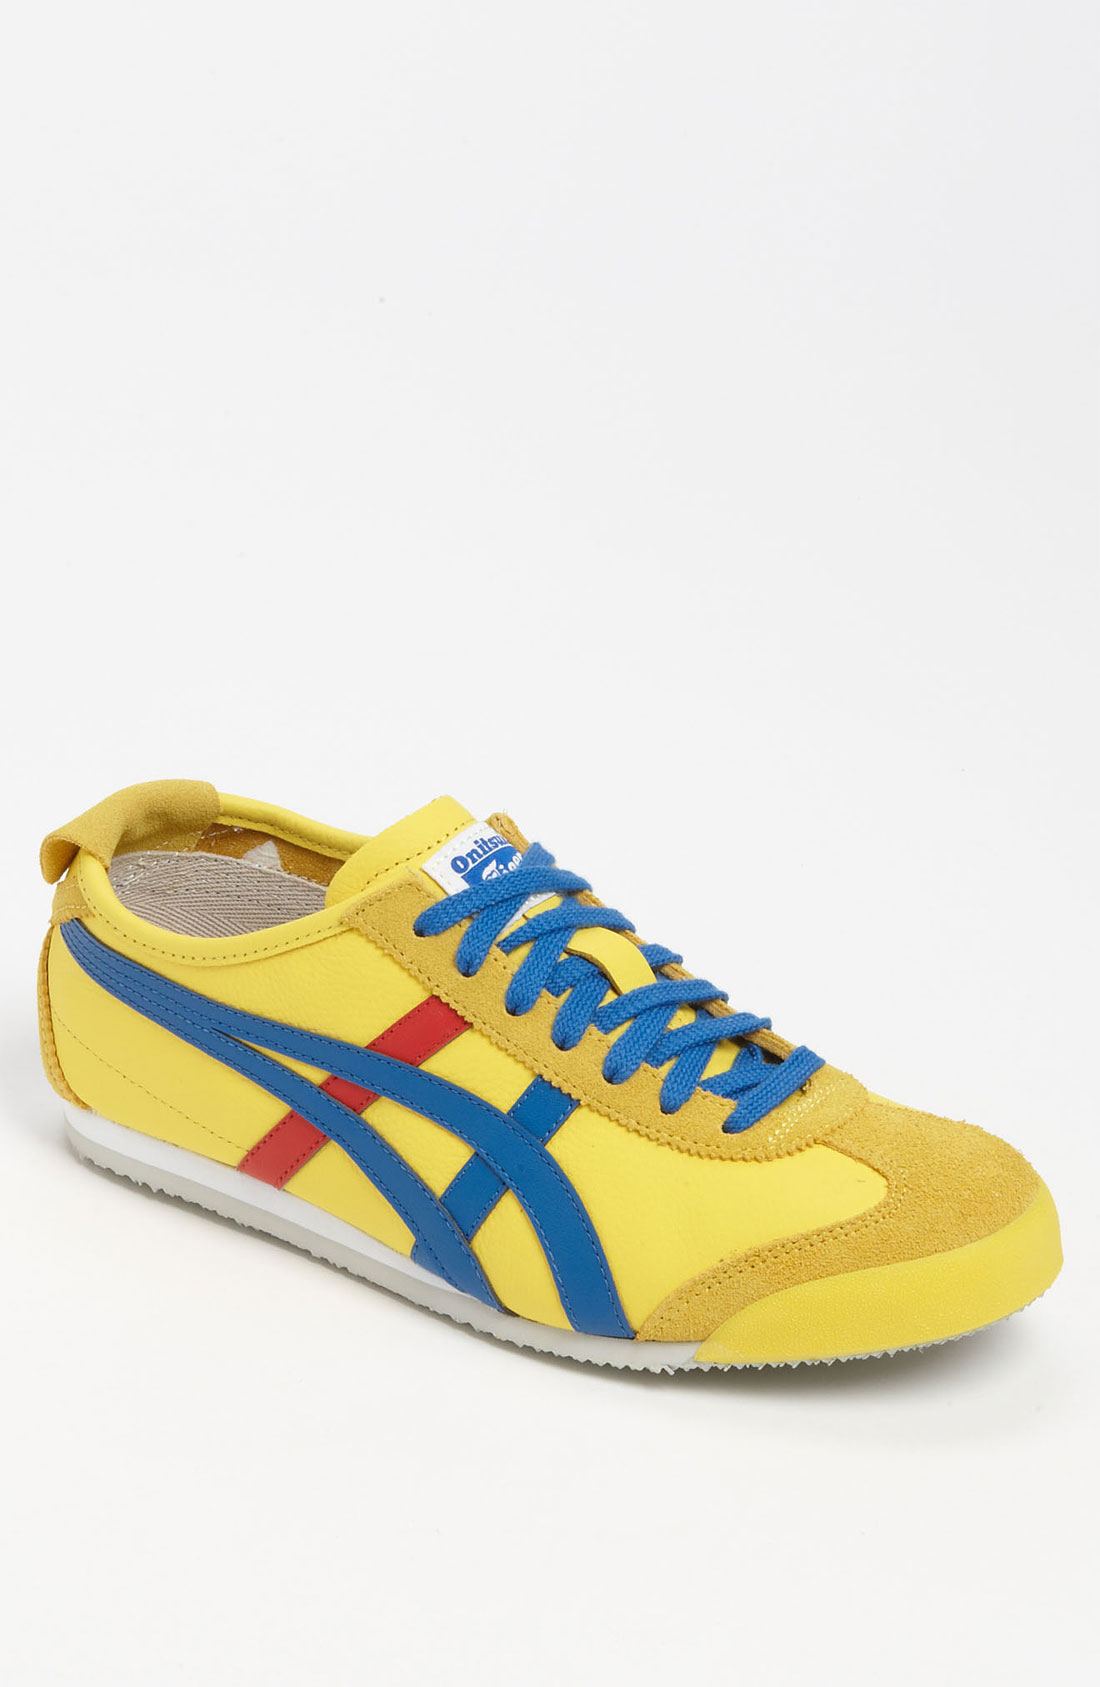 Onitsuka Tiger Mexico 66 Sneaker in Yellow for Men (yellow/ blue/ red ...